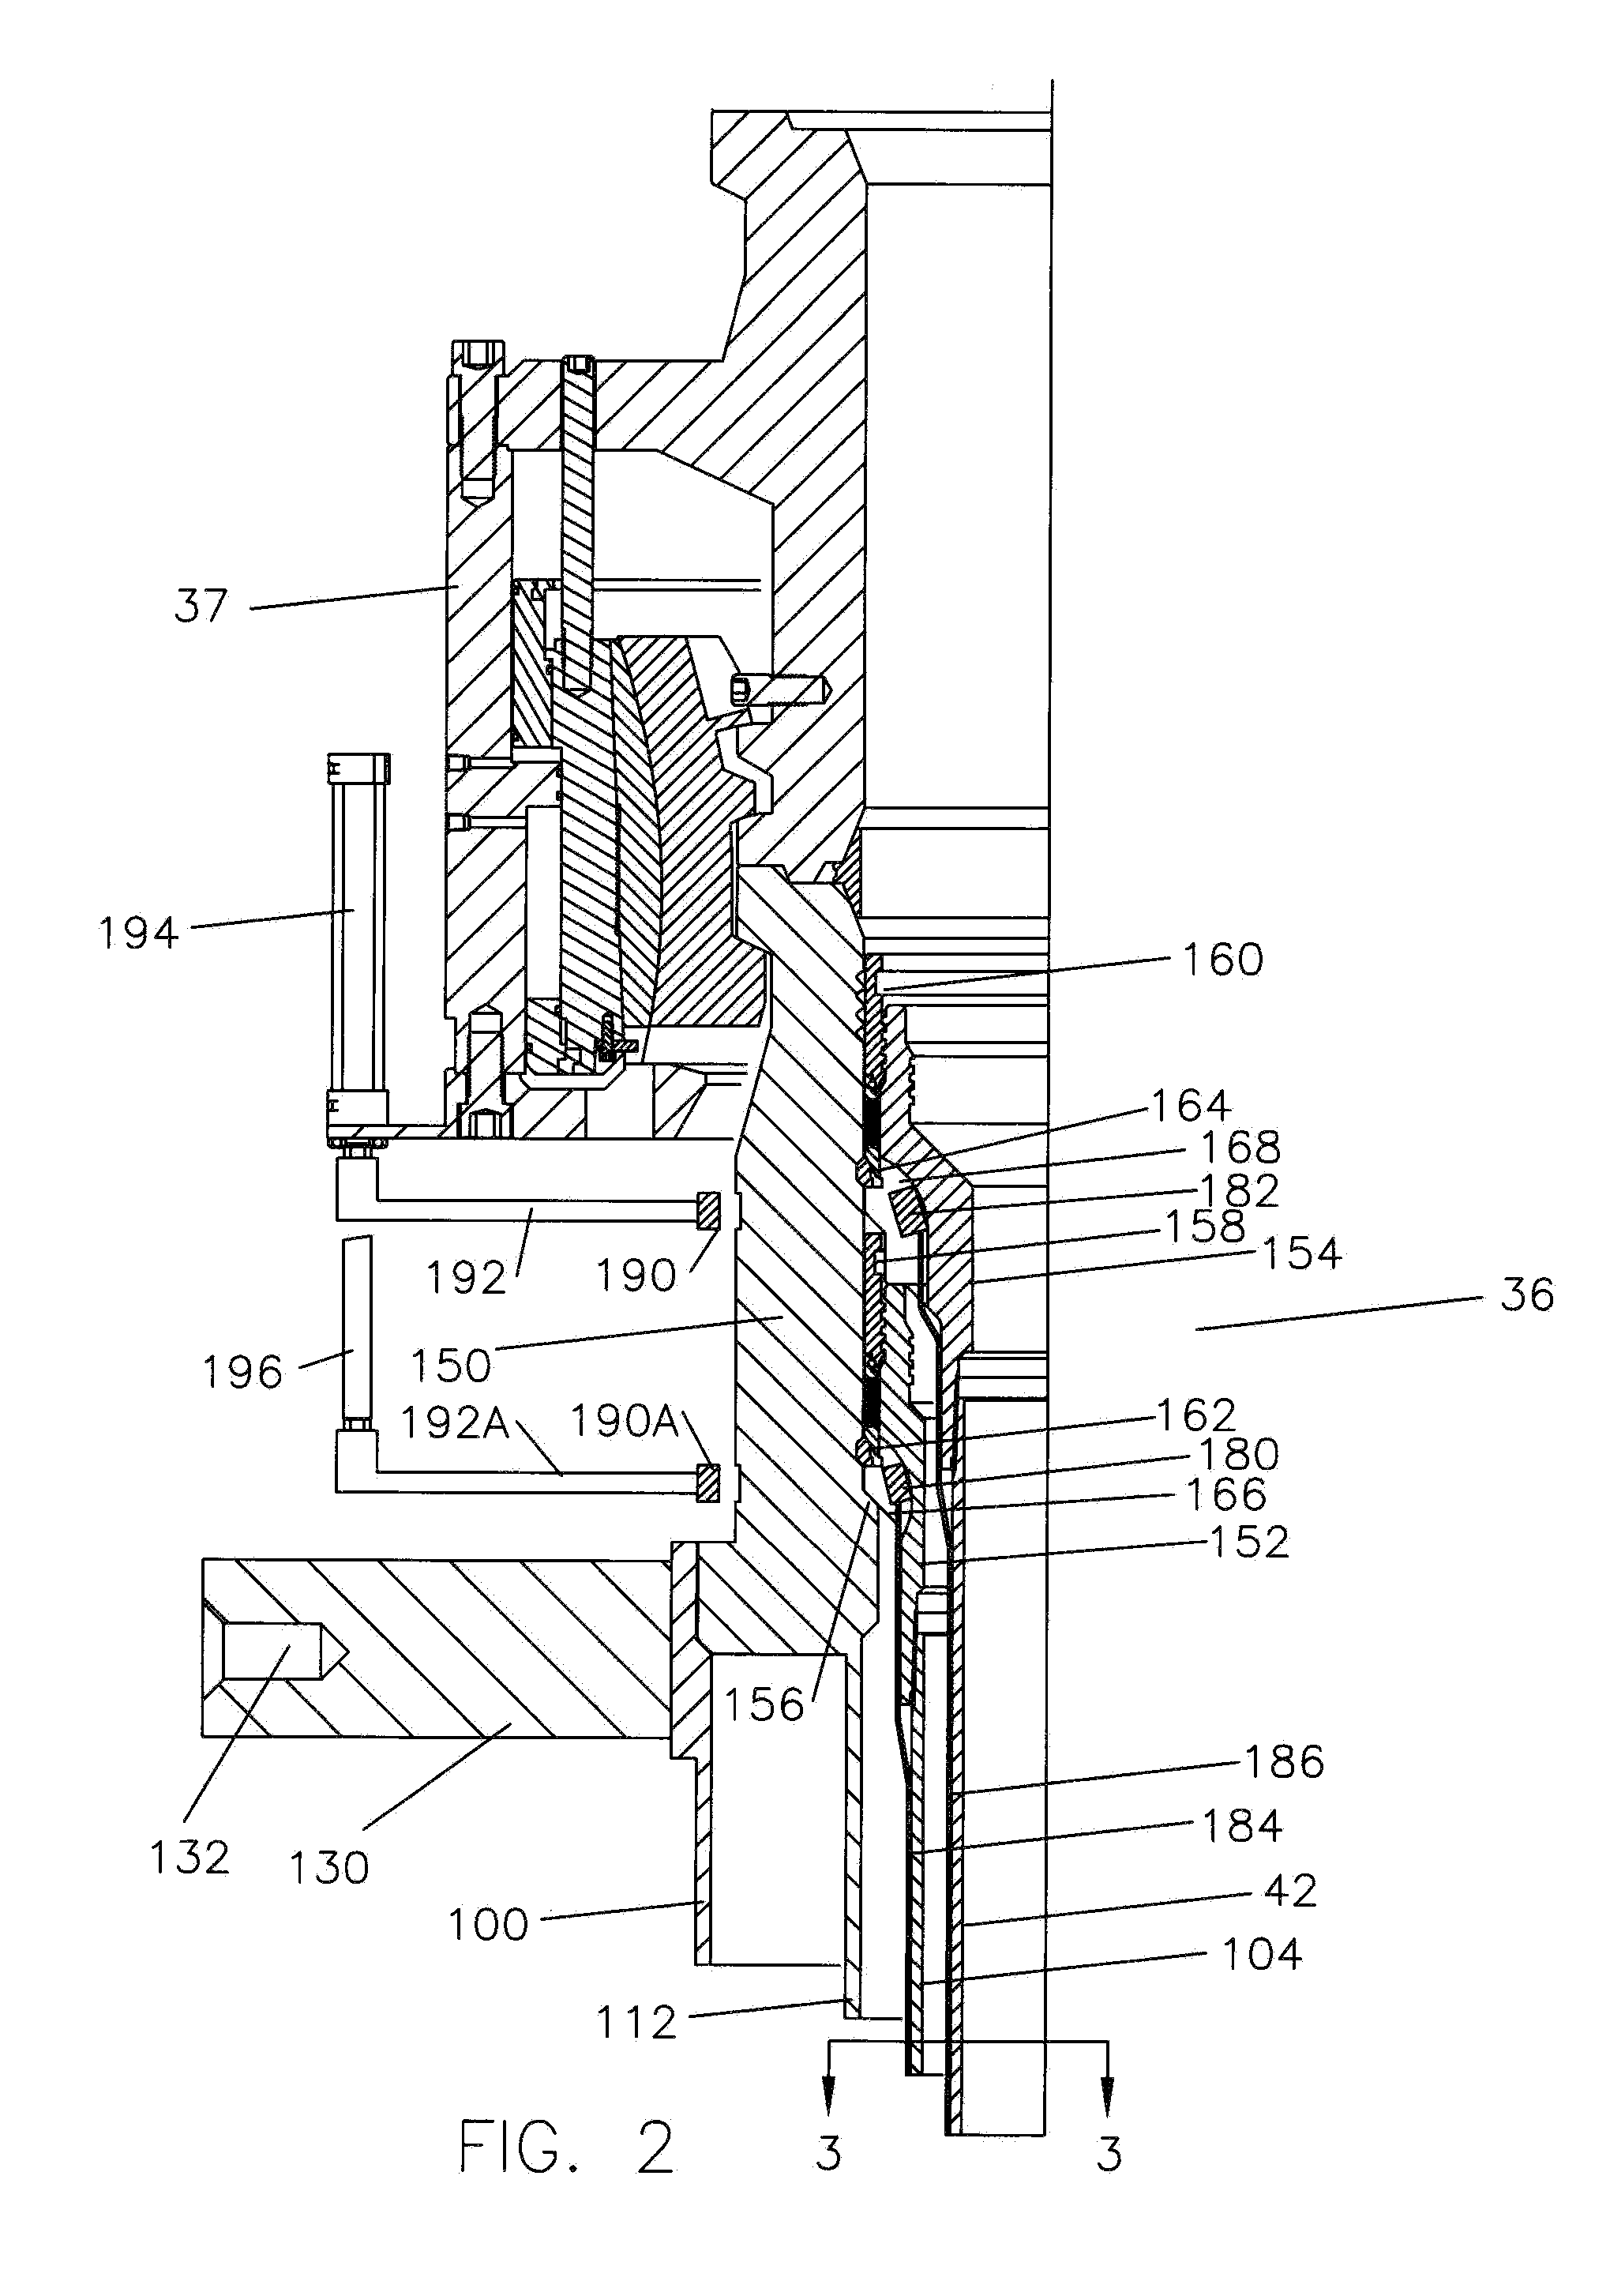 Method of non-intrusive communication of down hole annulus information